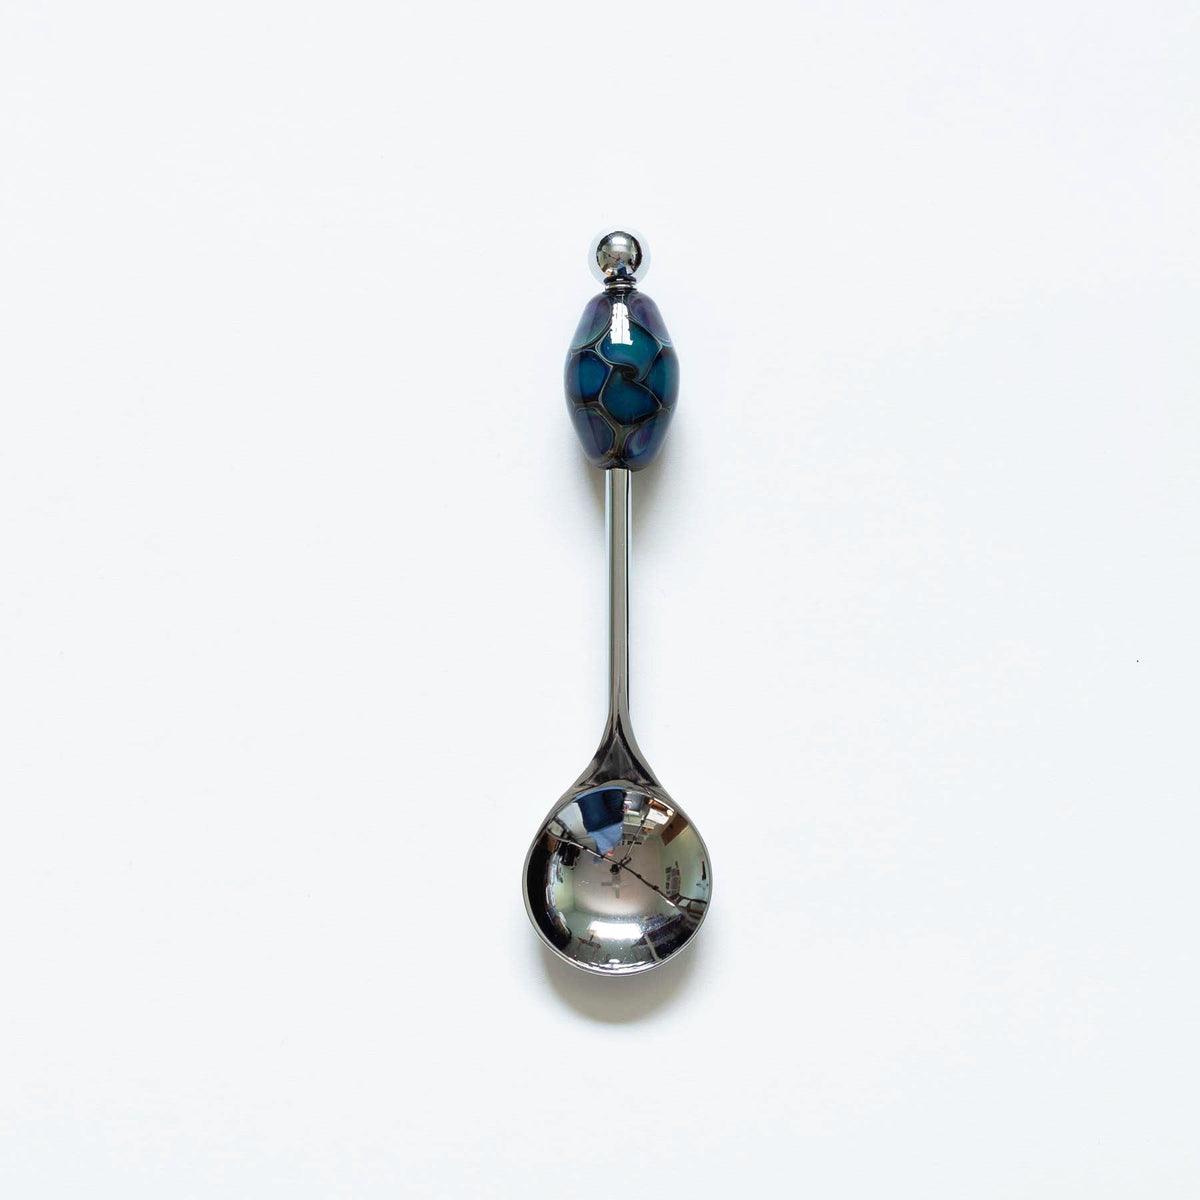 Beaded Jelly Spoons - Molten Glass Creations